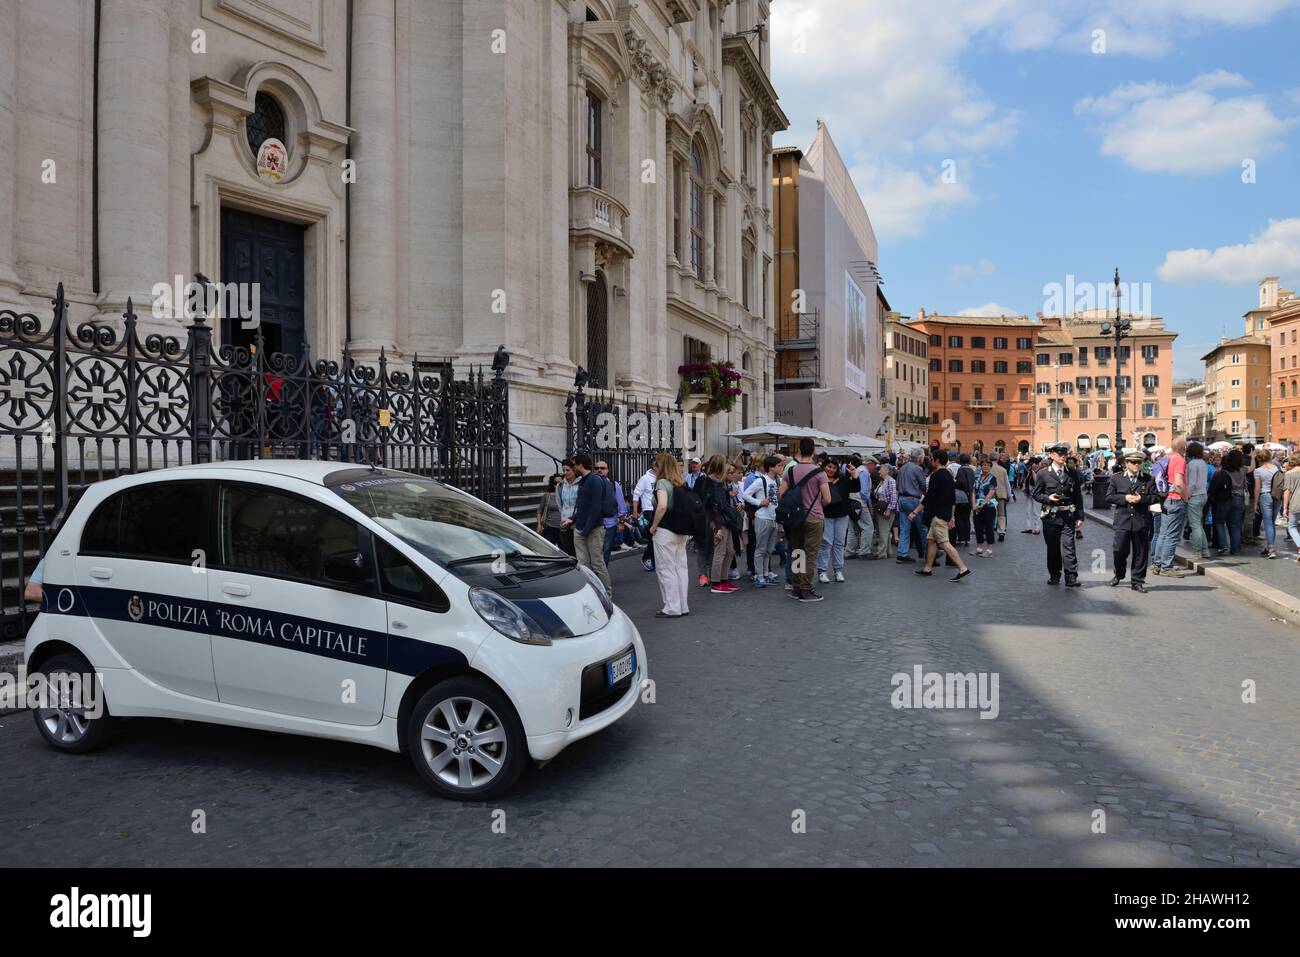 A police car in the Piazza Navona, Rome, Italy, Europe Stock Photo